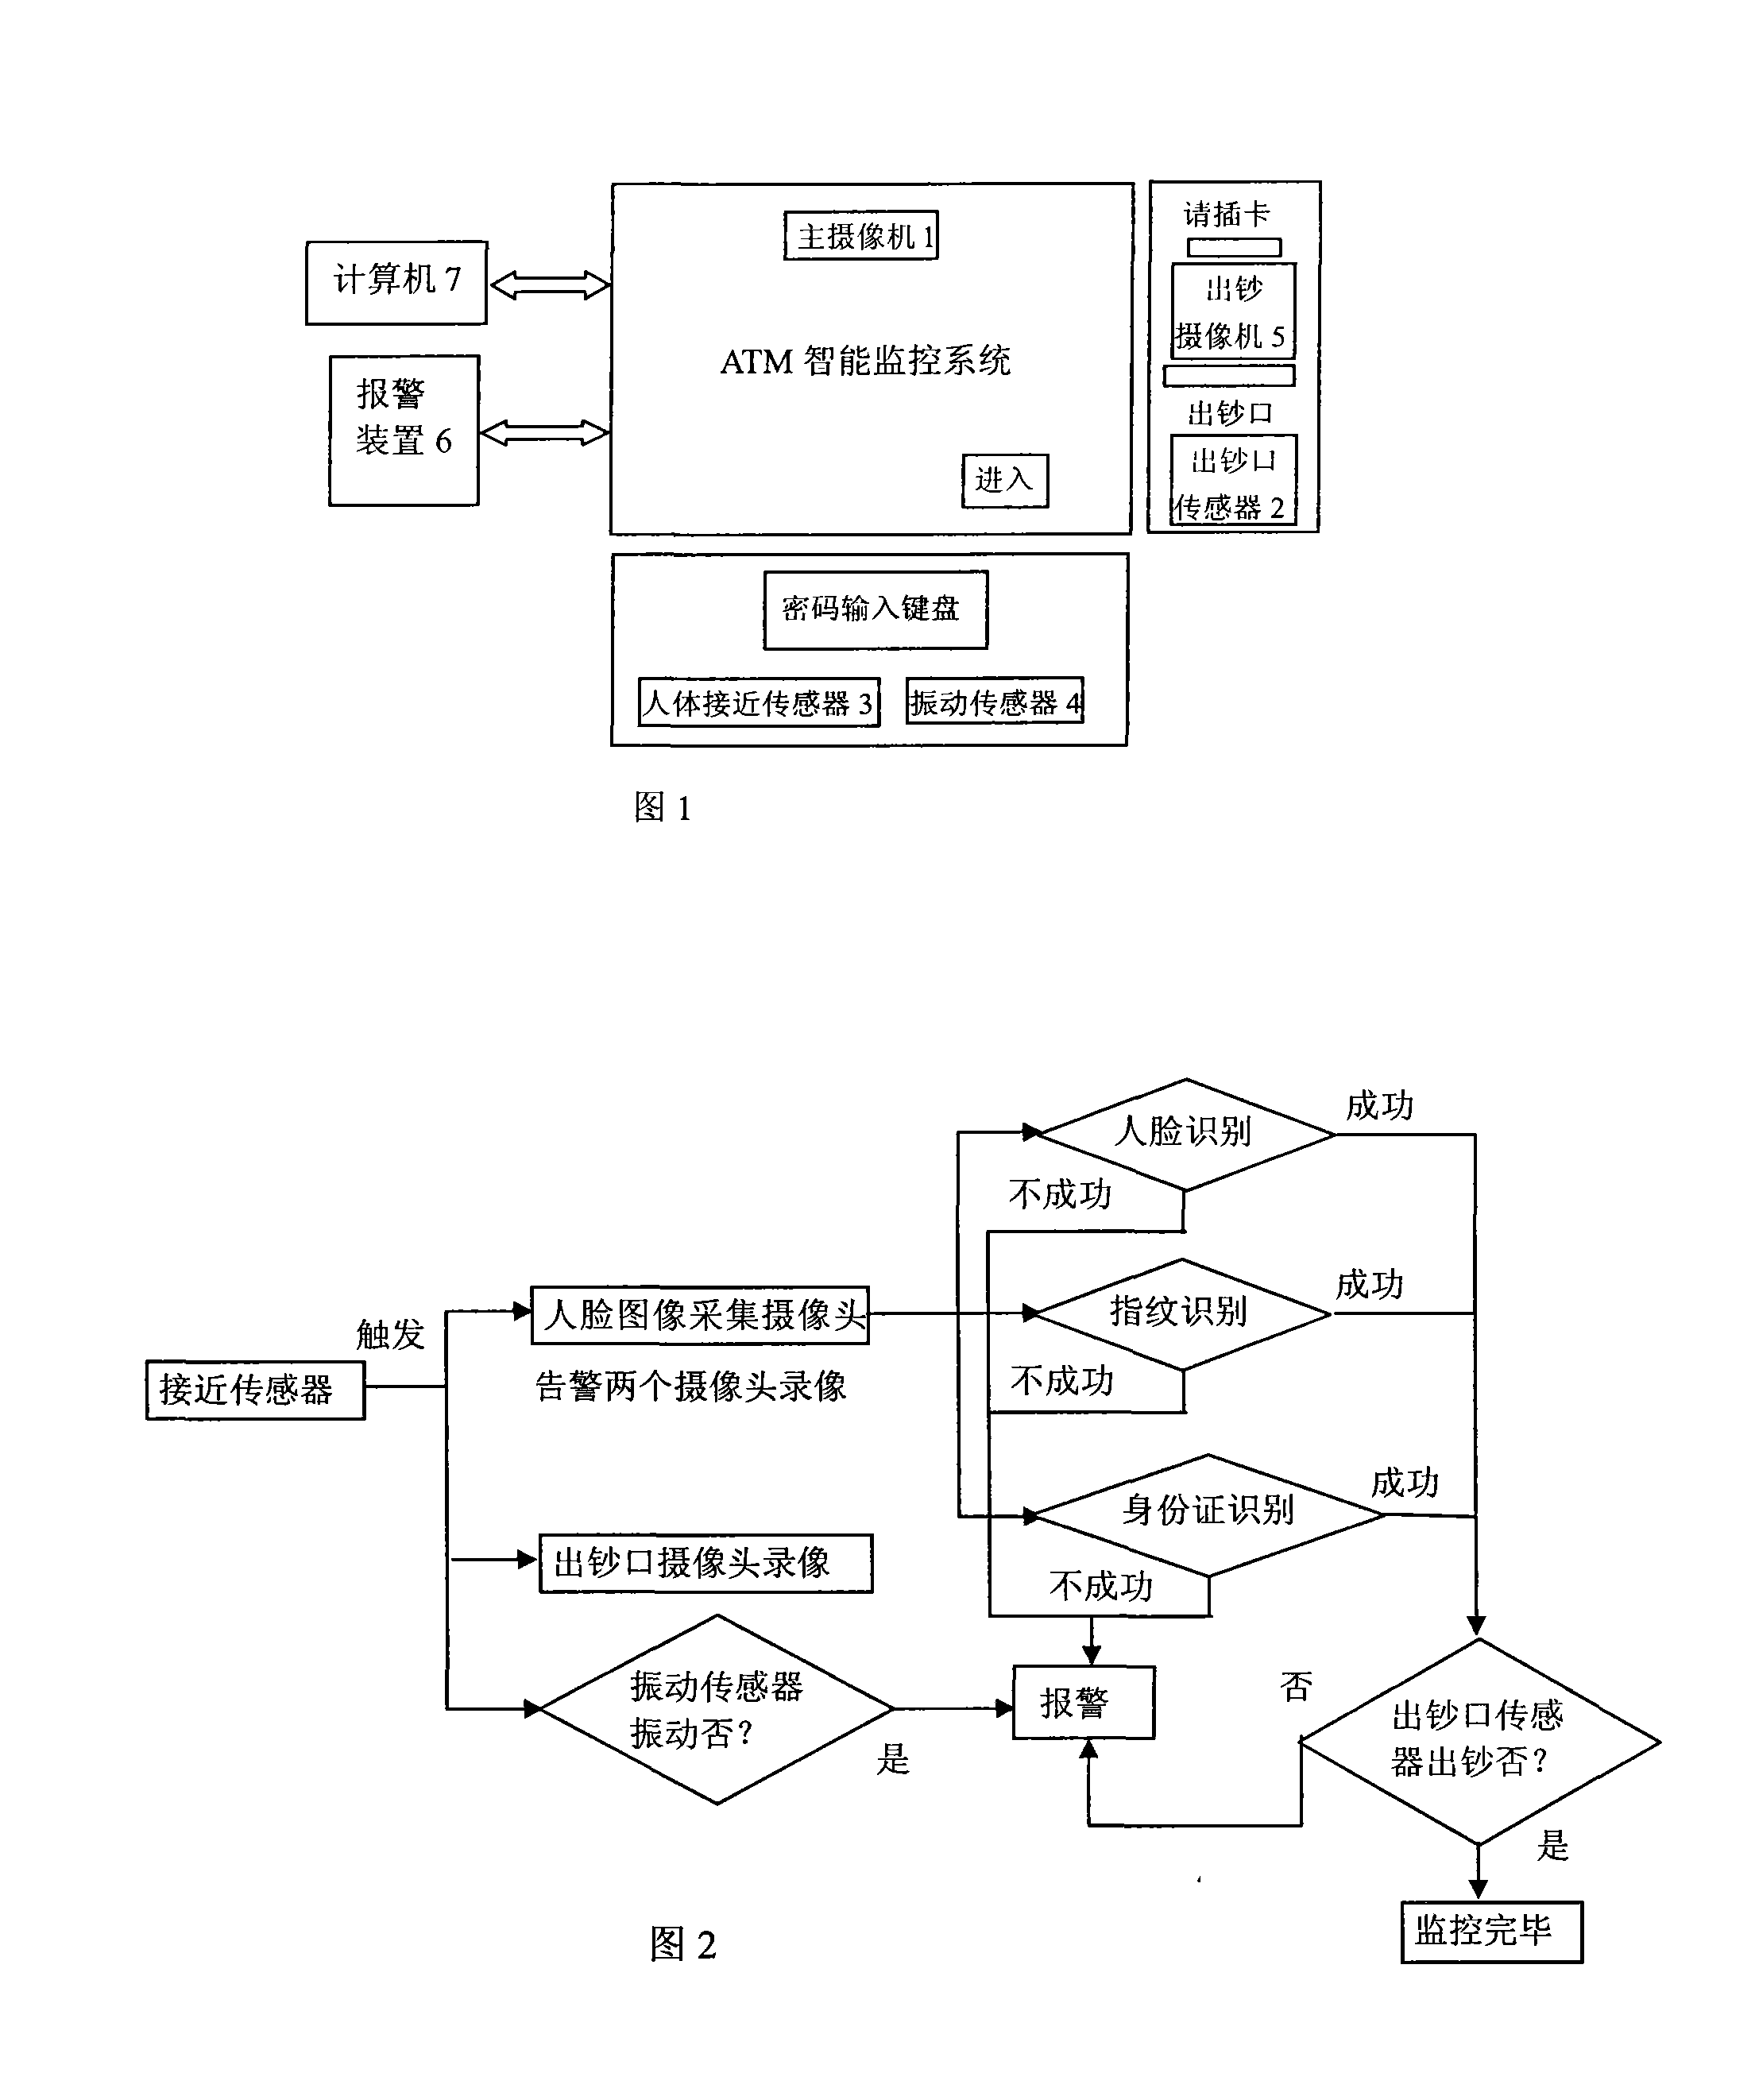 Intelligent monitoring system and method for ATM